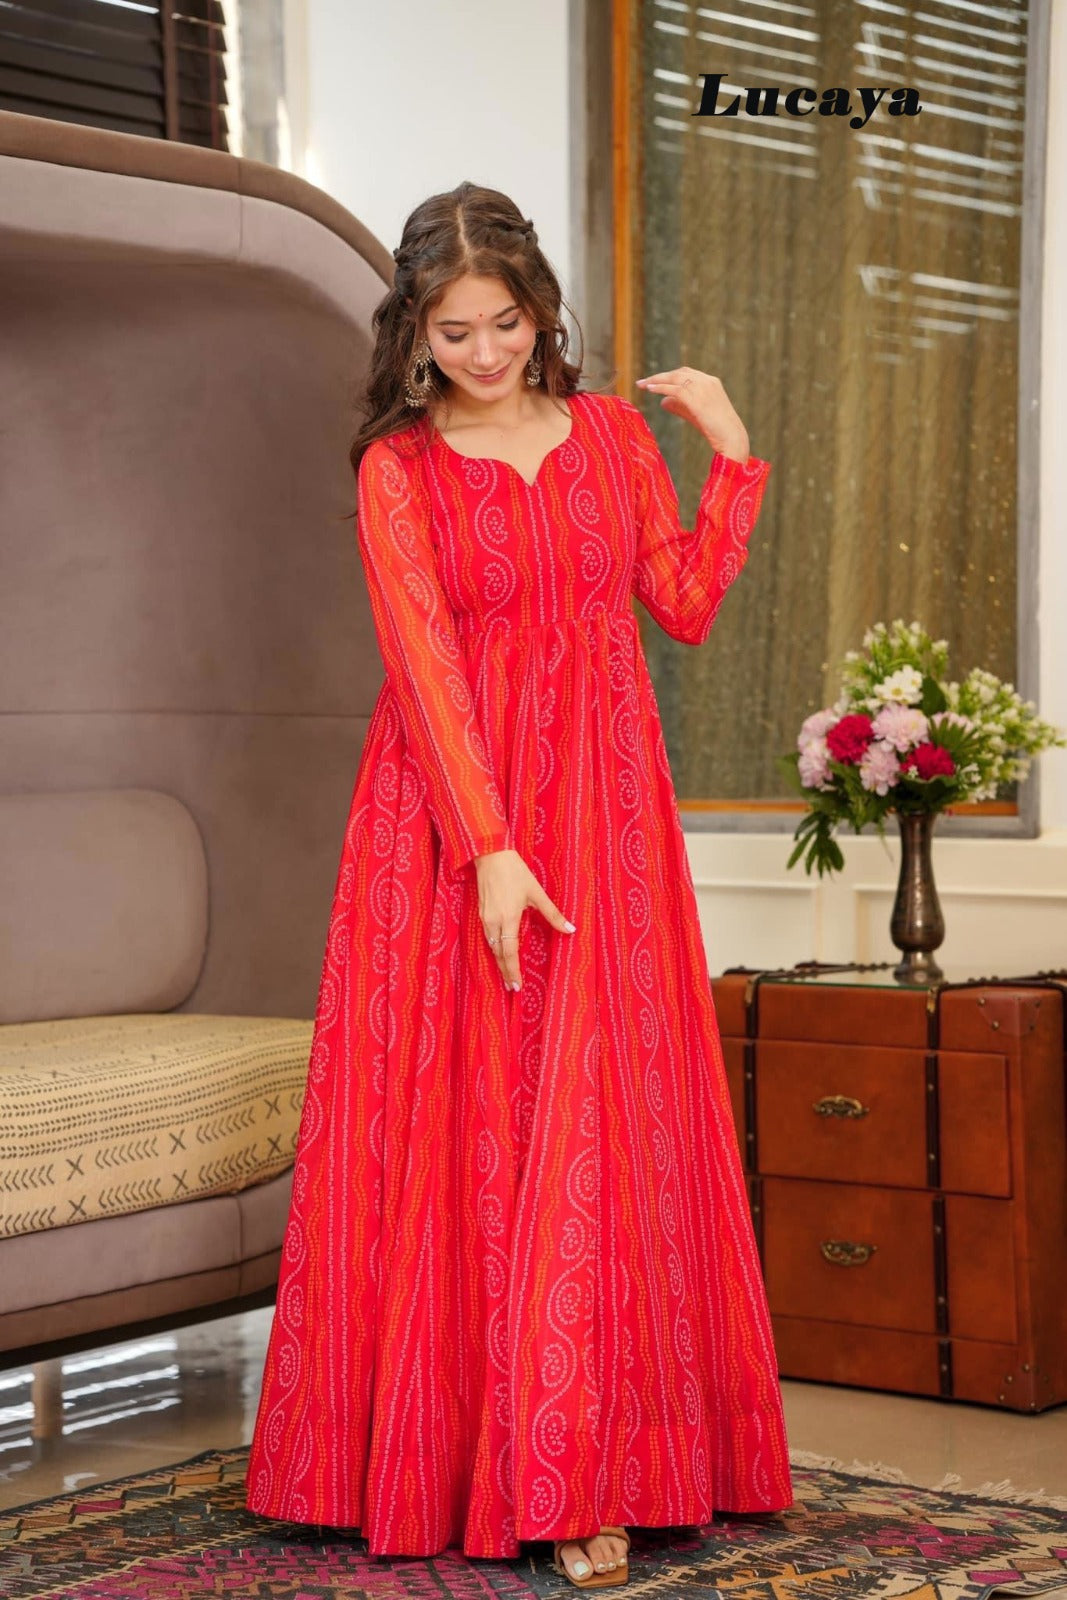 Vol 16 Lucaya Georgette One Piece Gown